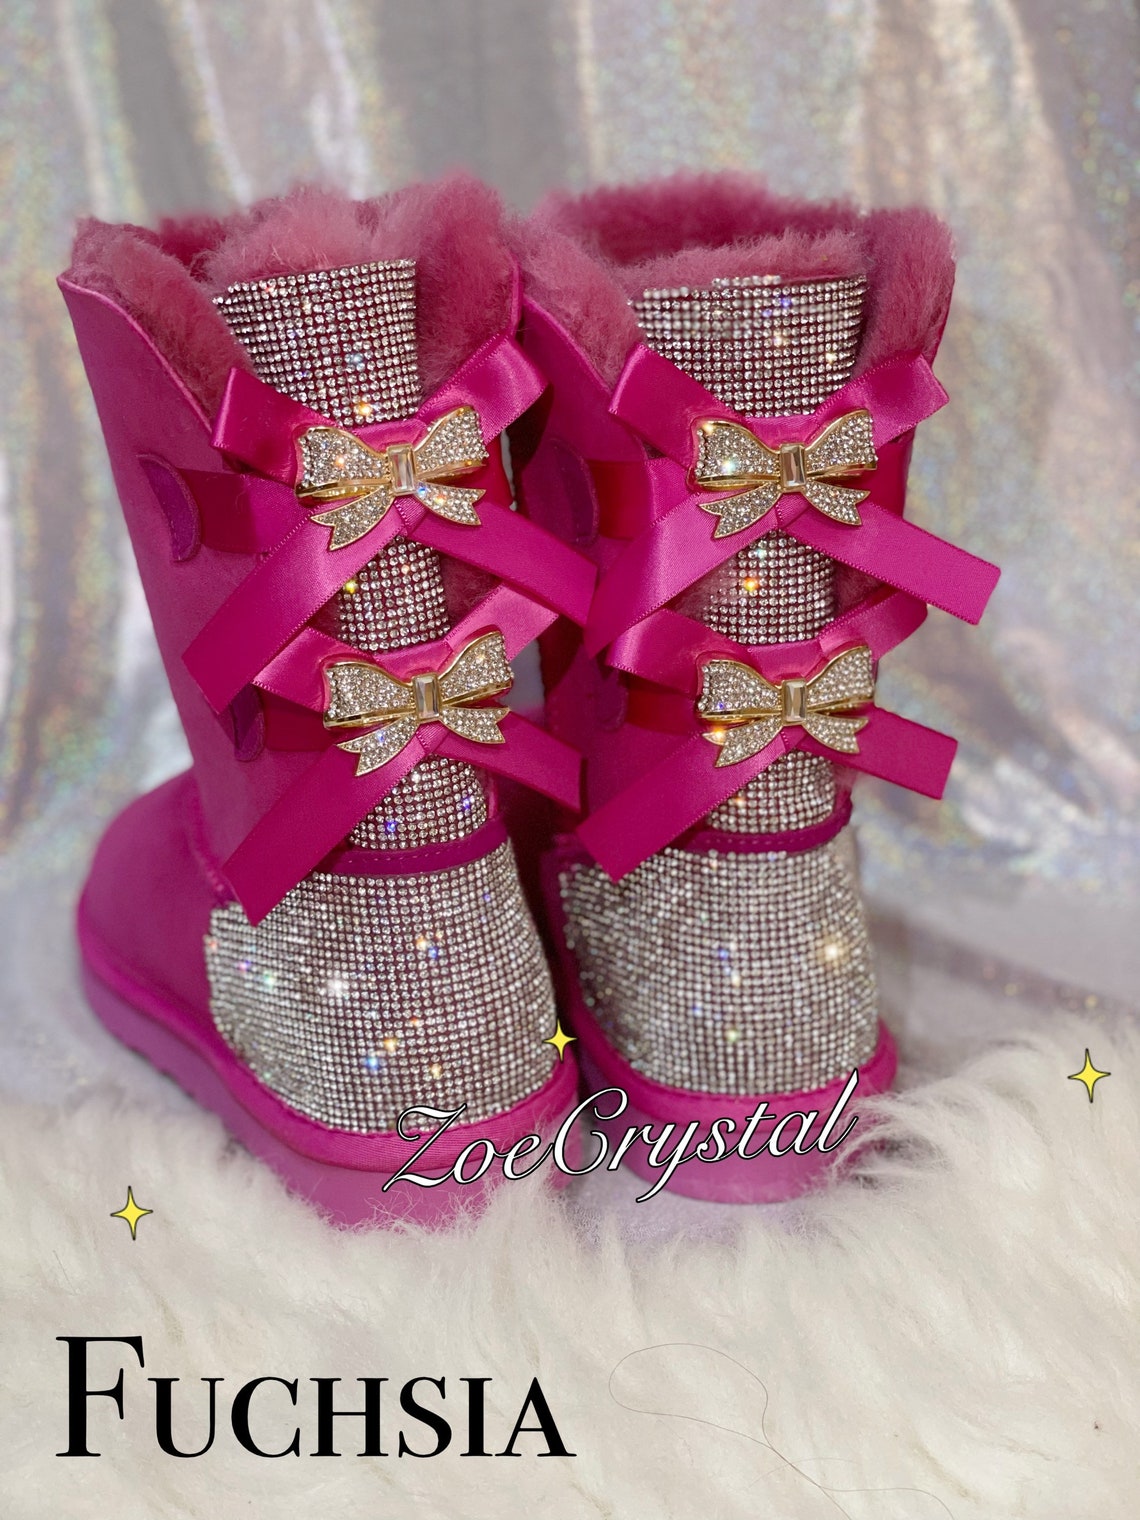 Newsuper Bling and Sparkly Middle High Sheepskin Wool BOOTS | Etsy